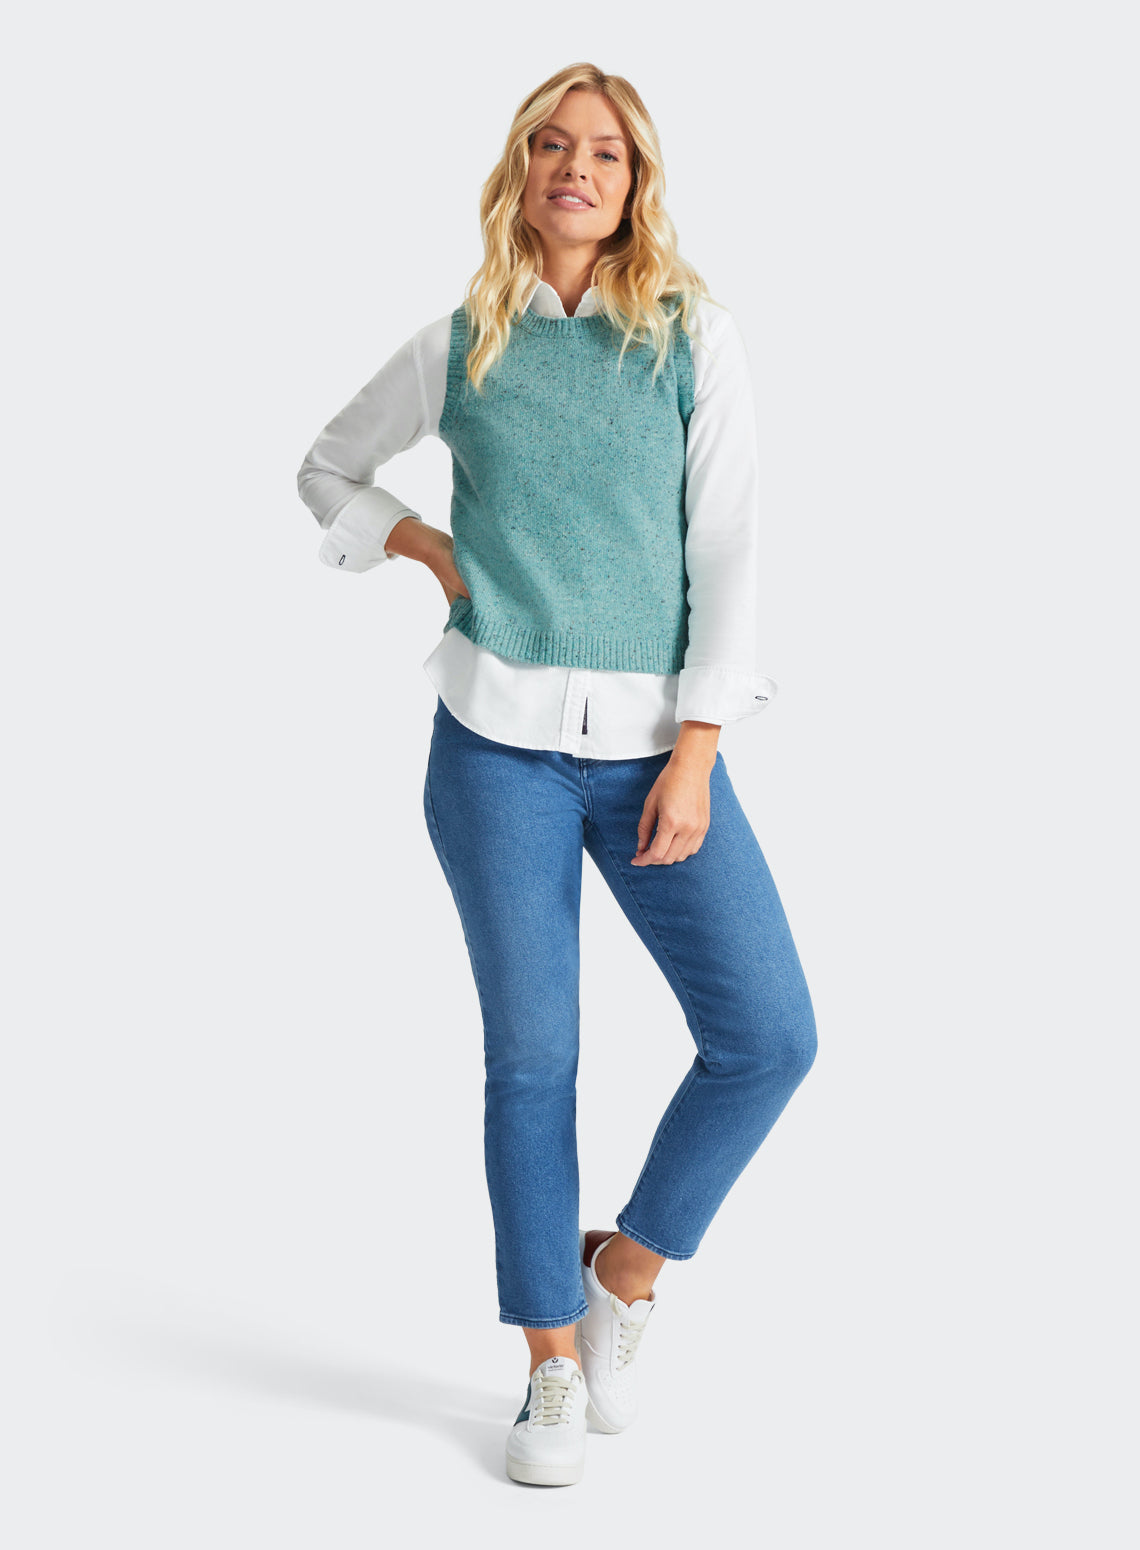 Knitted Neppy Vest in Mint